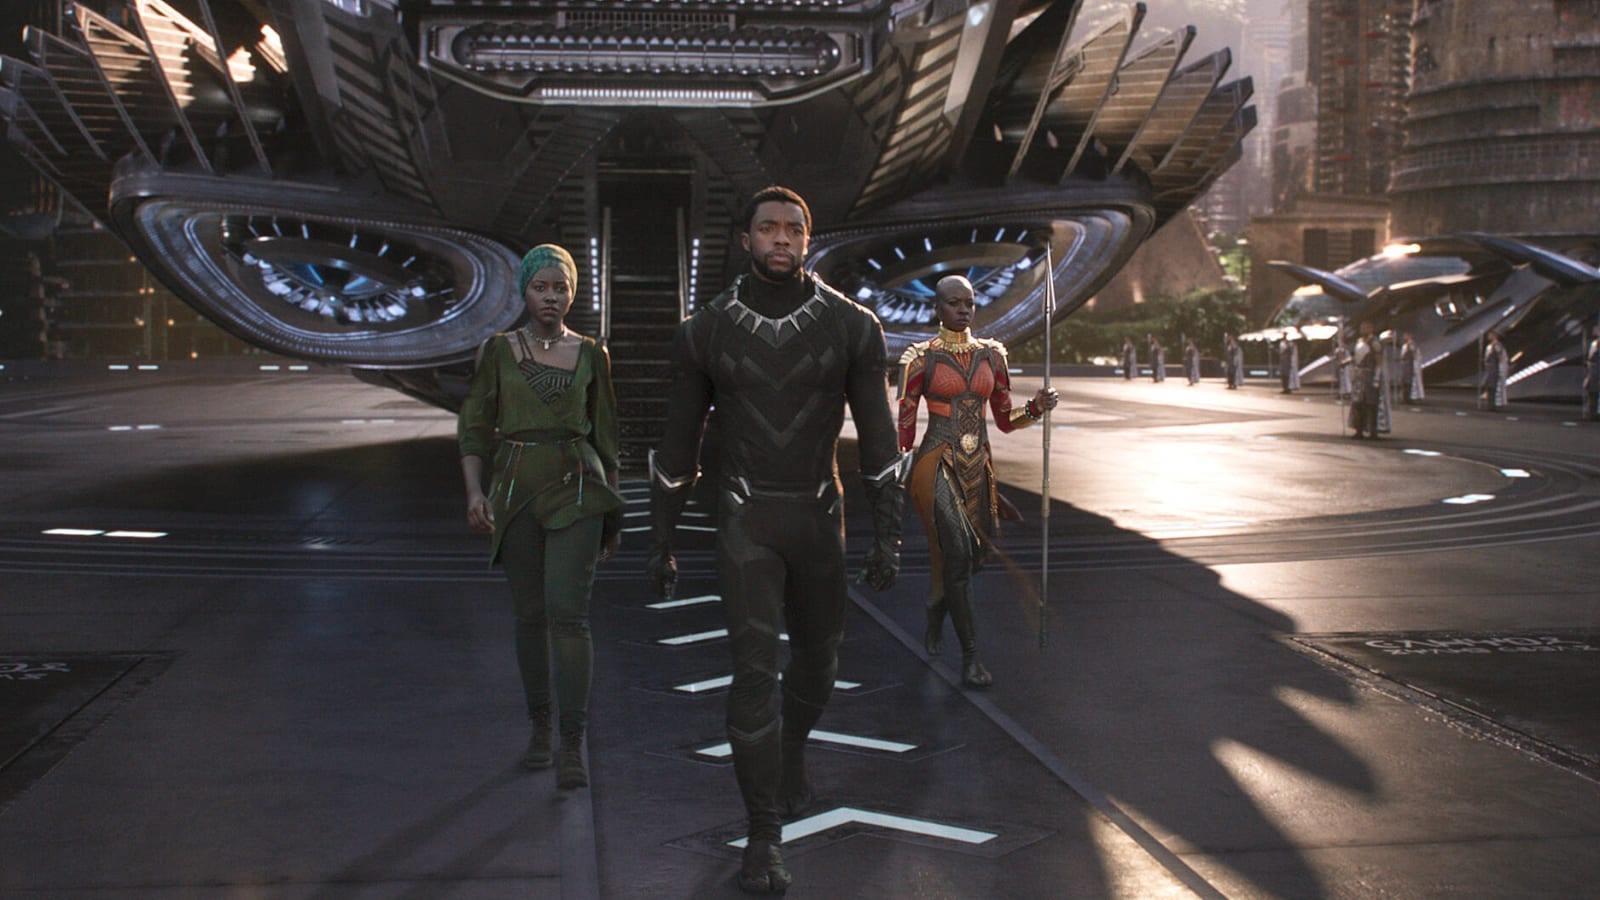 20 facts you might not know about 'Black Panther'